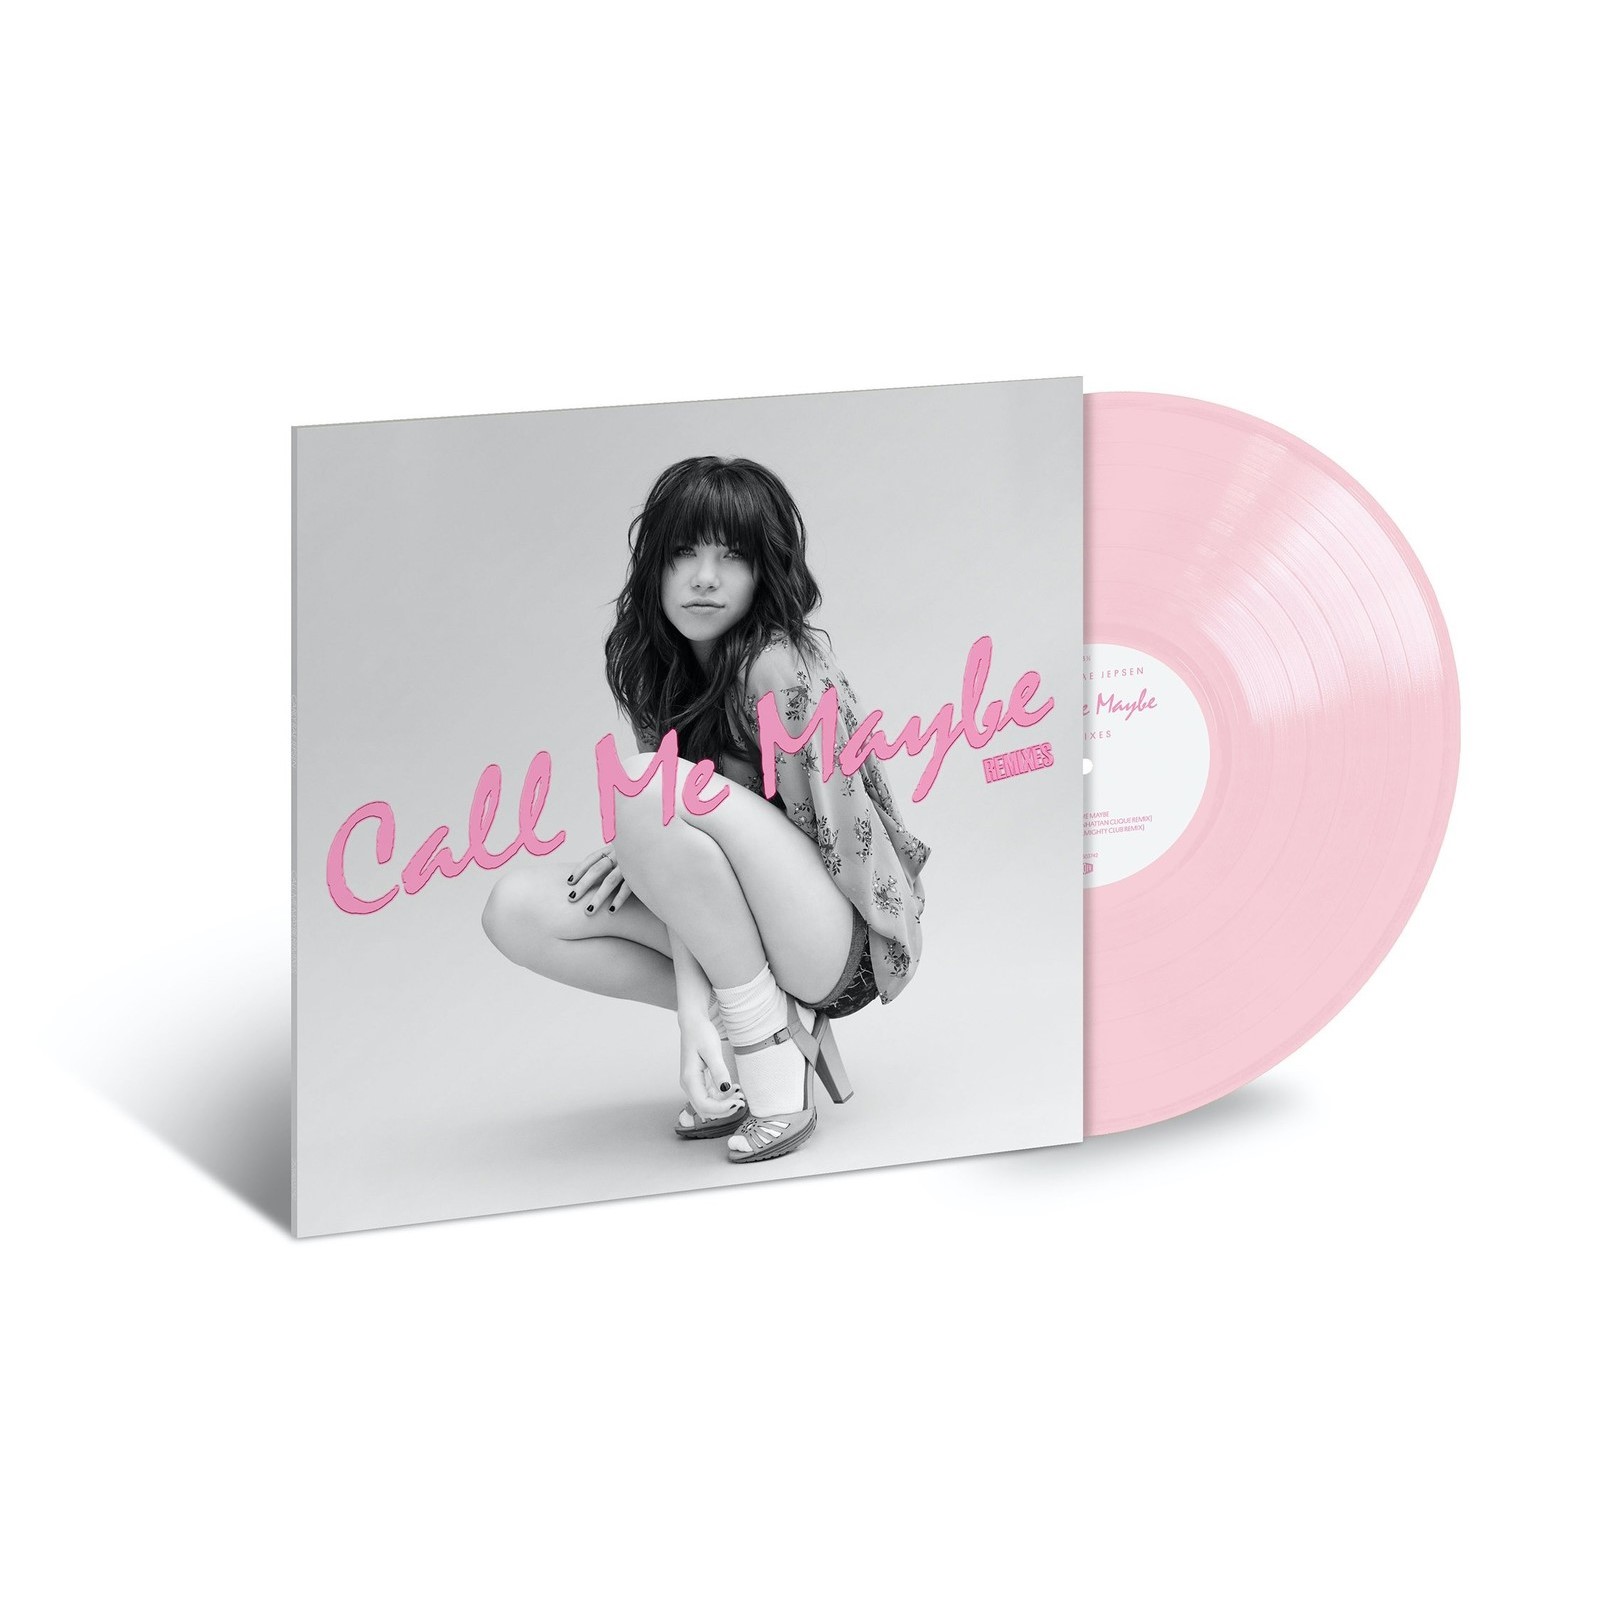 Carly Rae Jepsen - Call Me Maybe (Remixes) (Pink Marble, 10th Anniversary Edition 12